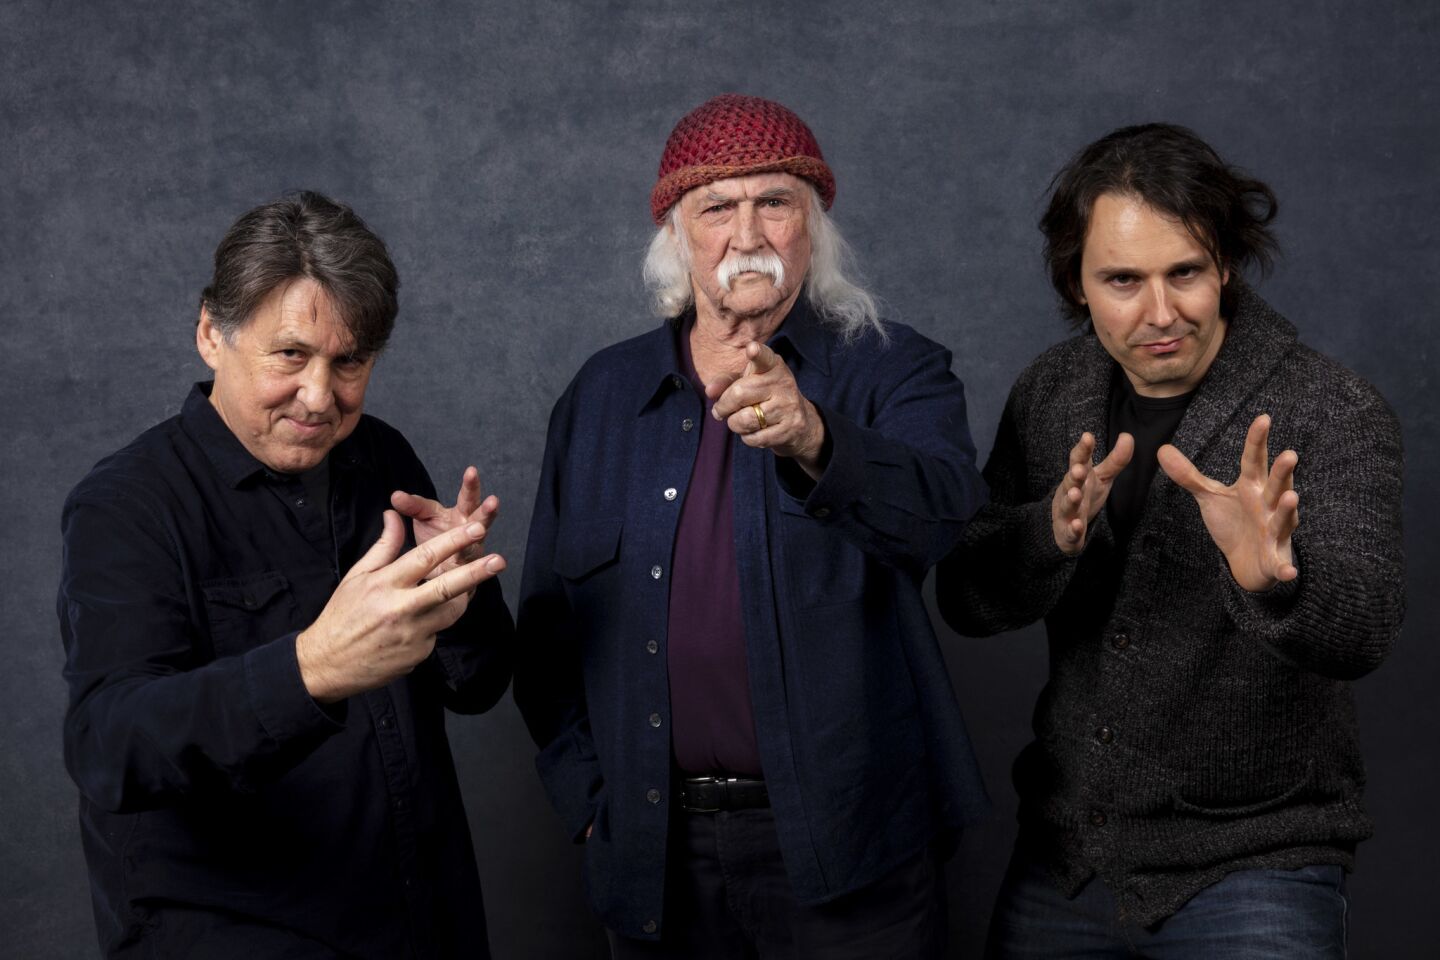 Producer Cameron Crow, left, subject David Crosby and director A.J. Eaton, from the documentary "David Crosby: Remember My Name," photographed at the 2019 Sundance Film Festival in Park City, Utah, on Friday, Jan. 25.